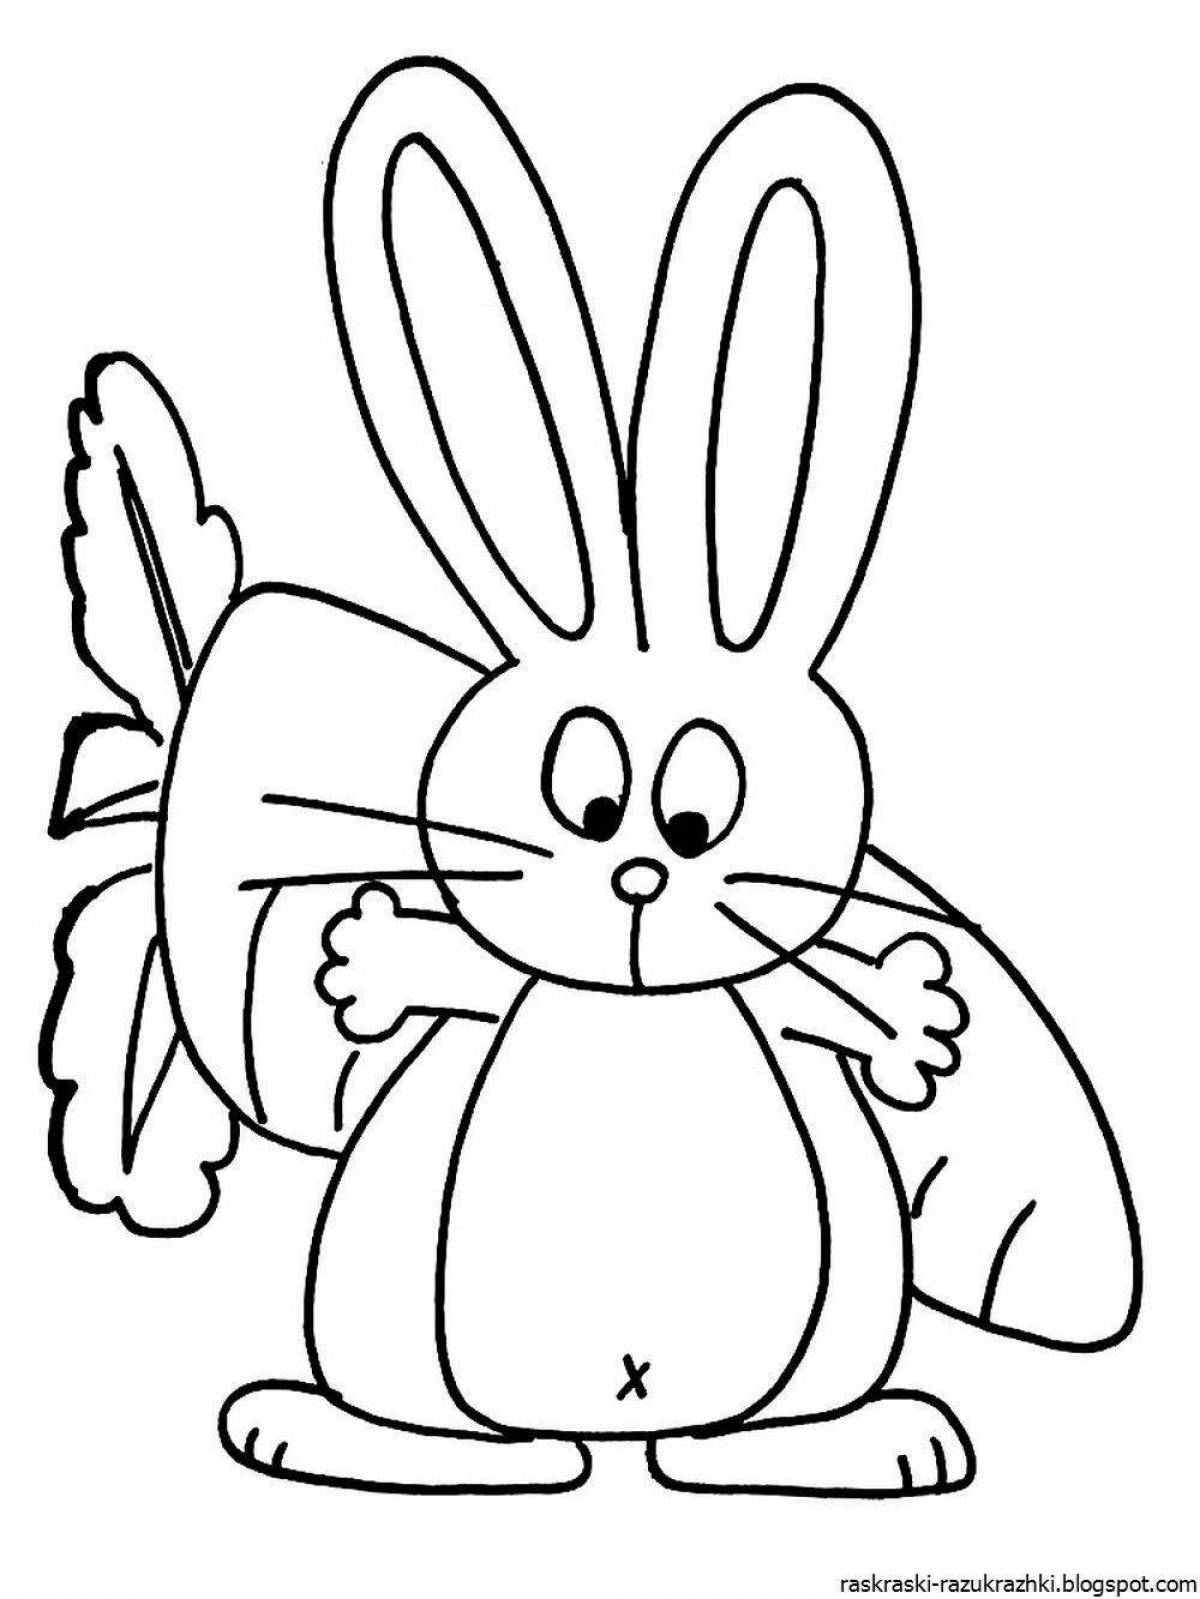 Coloring book cheerful rabbit